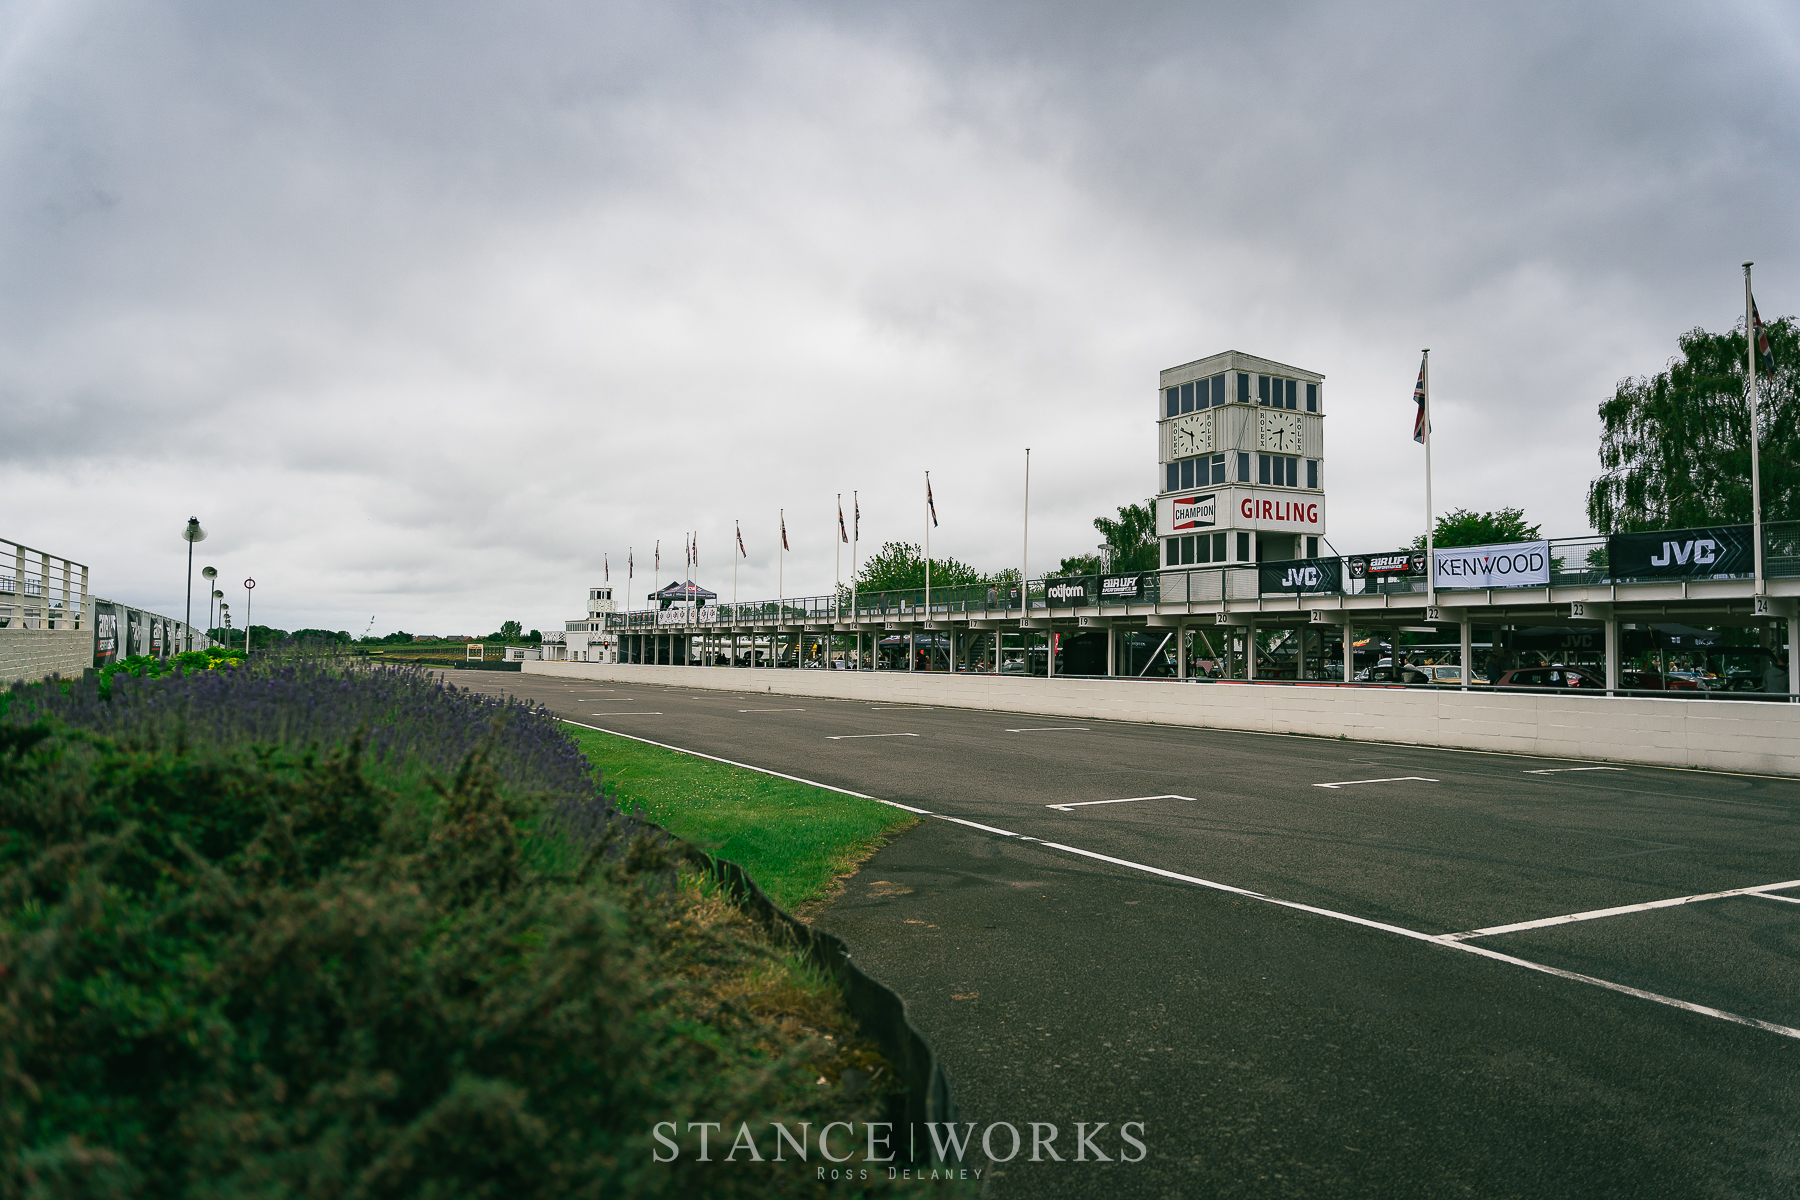 How to drift the Goodwood Motor Circuit